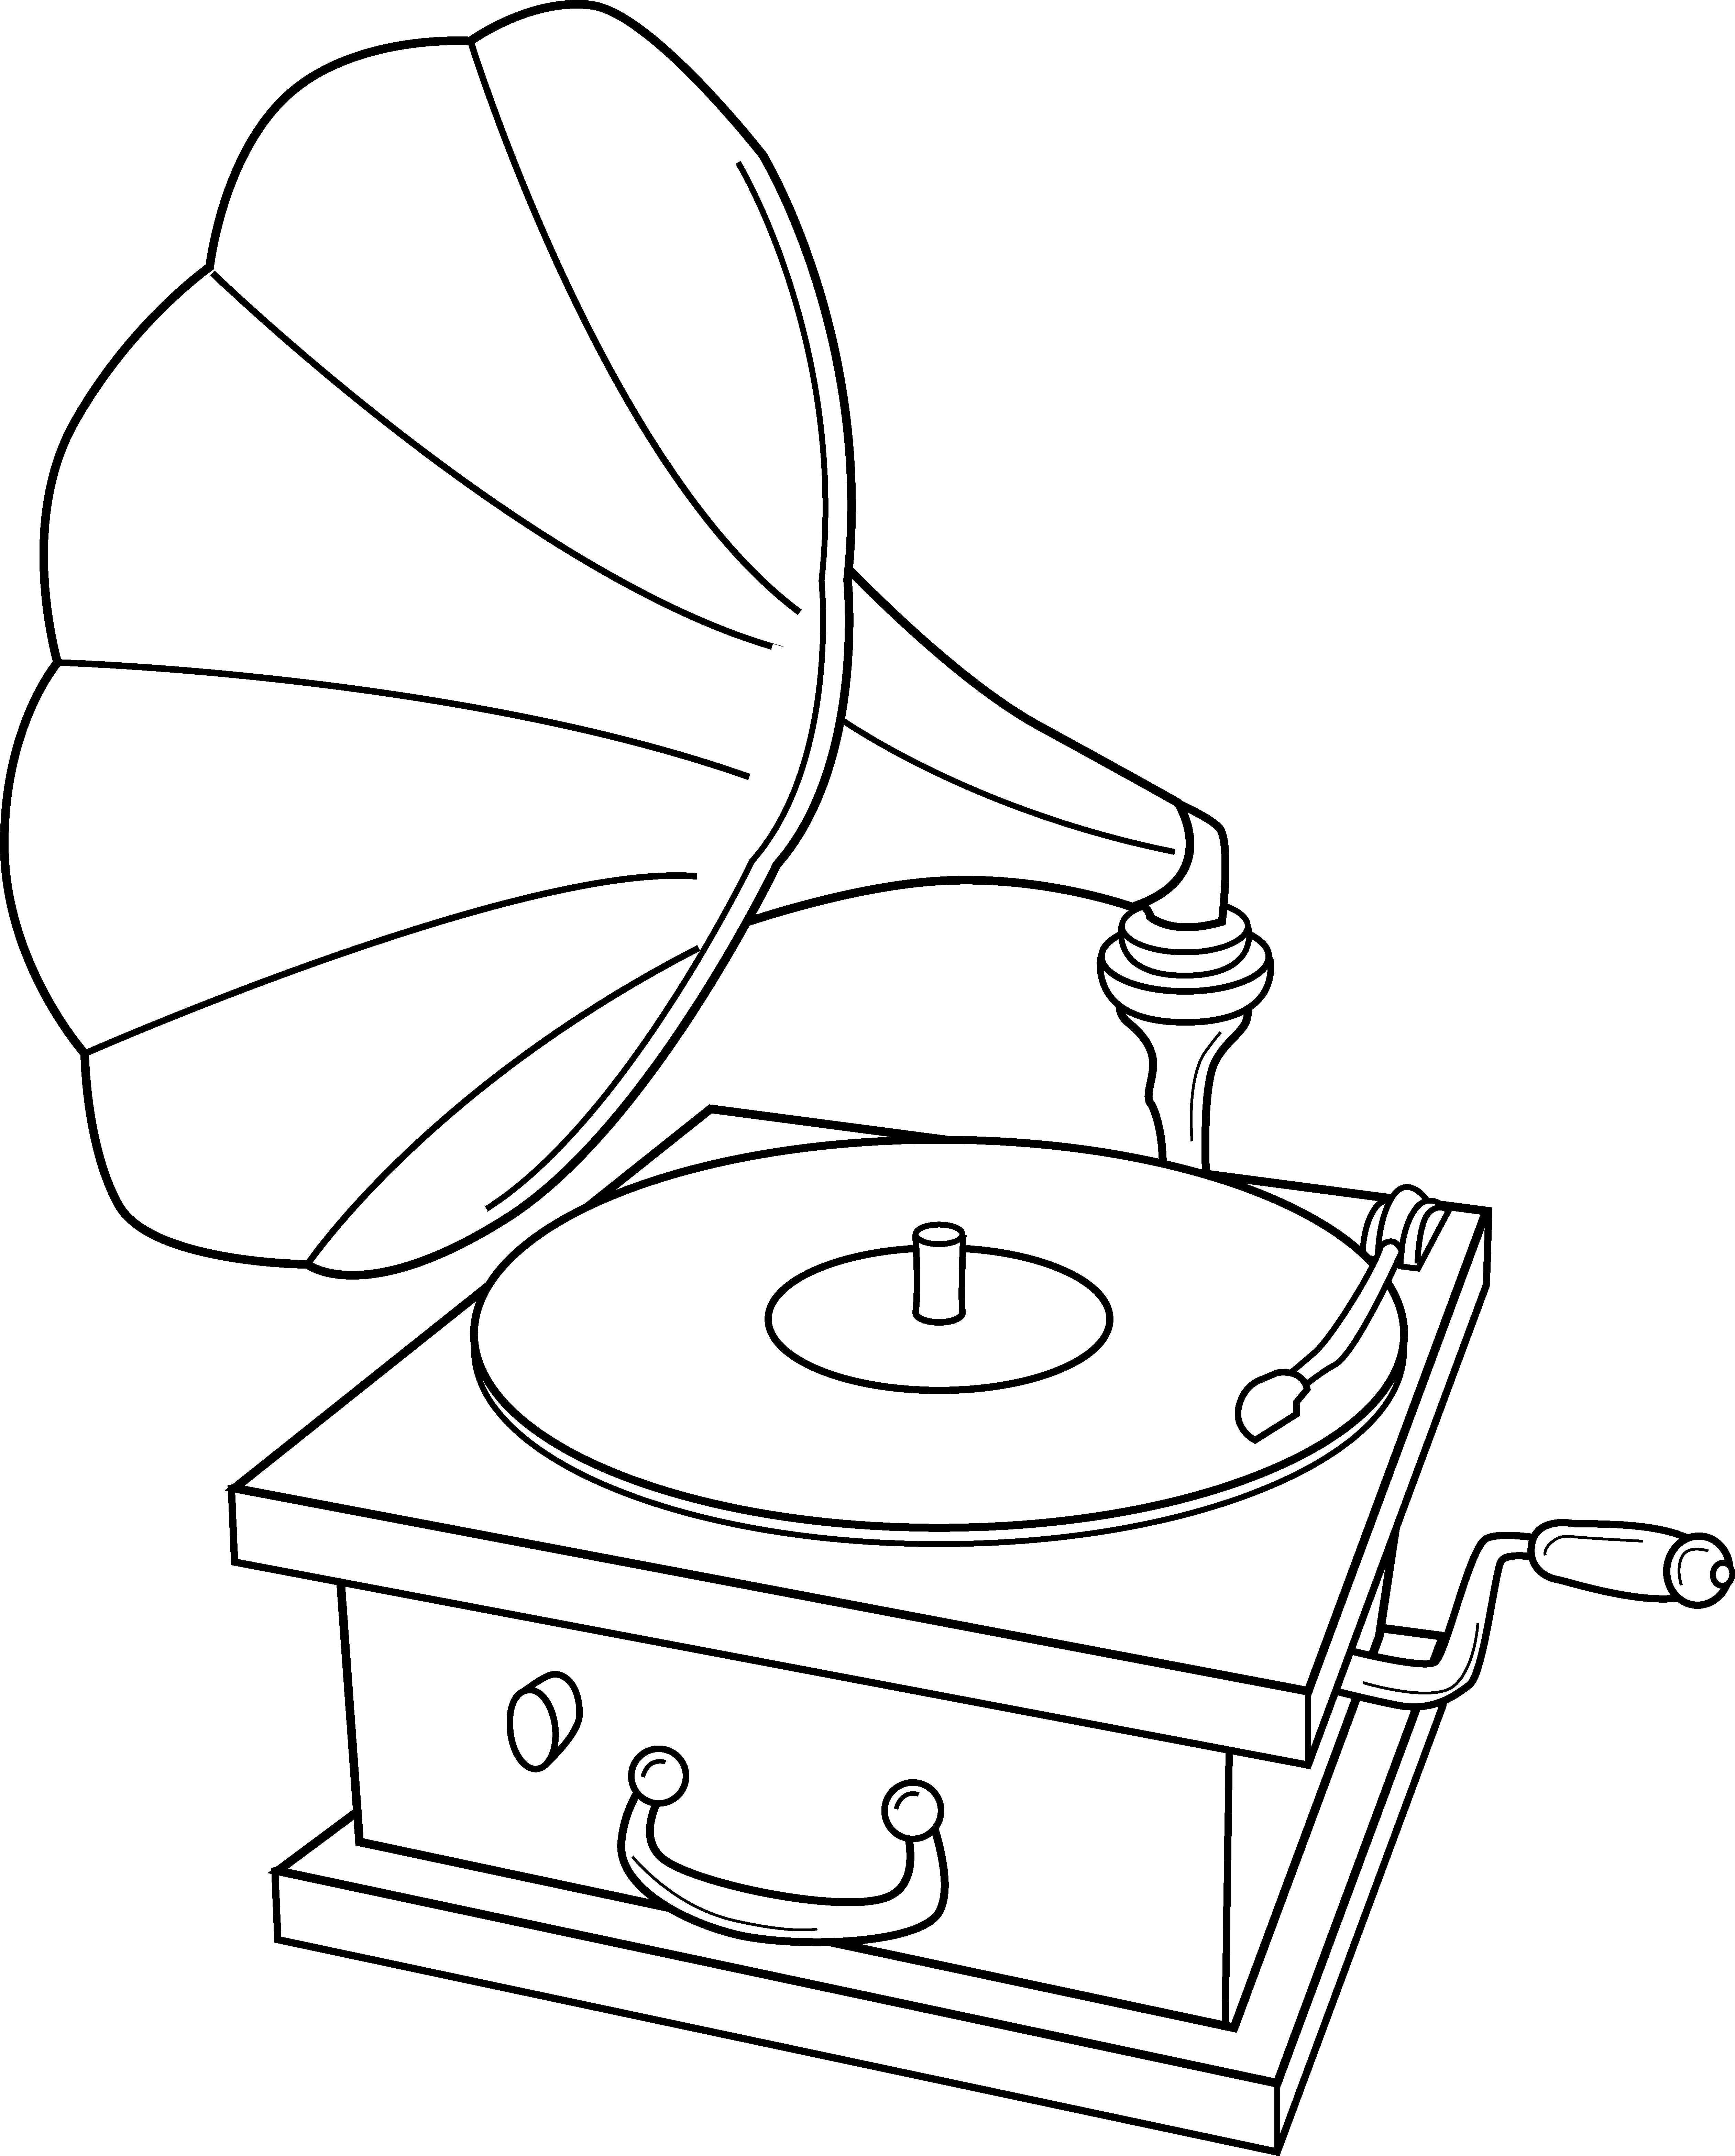 Record player drawing at. Phone clipart old style